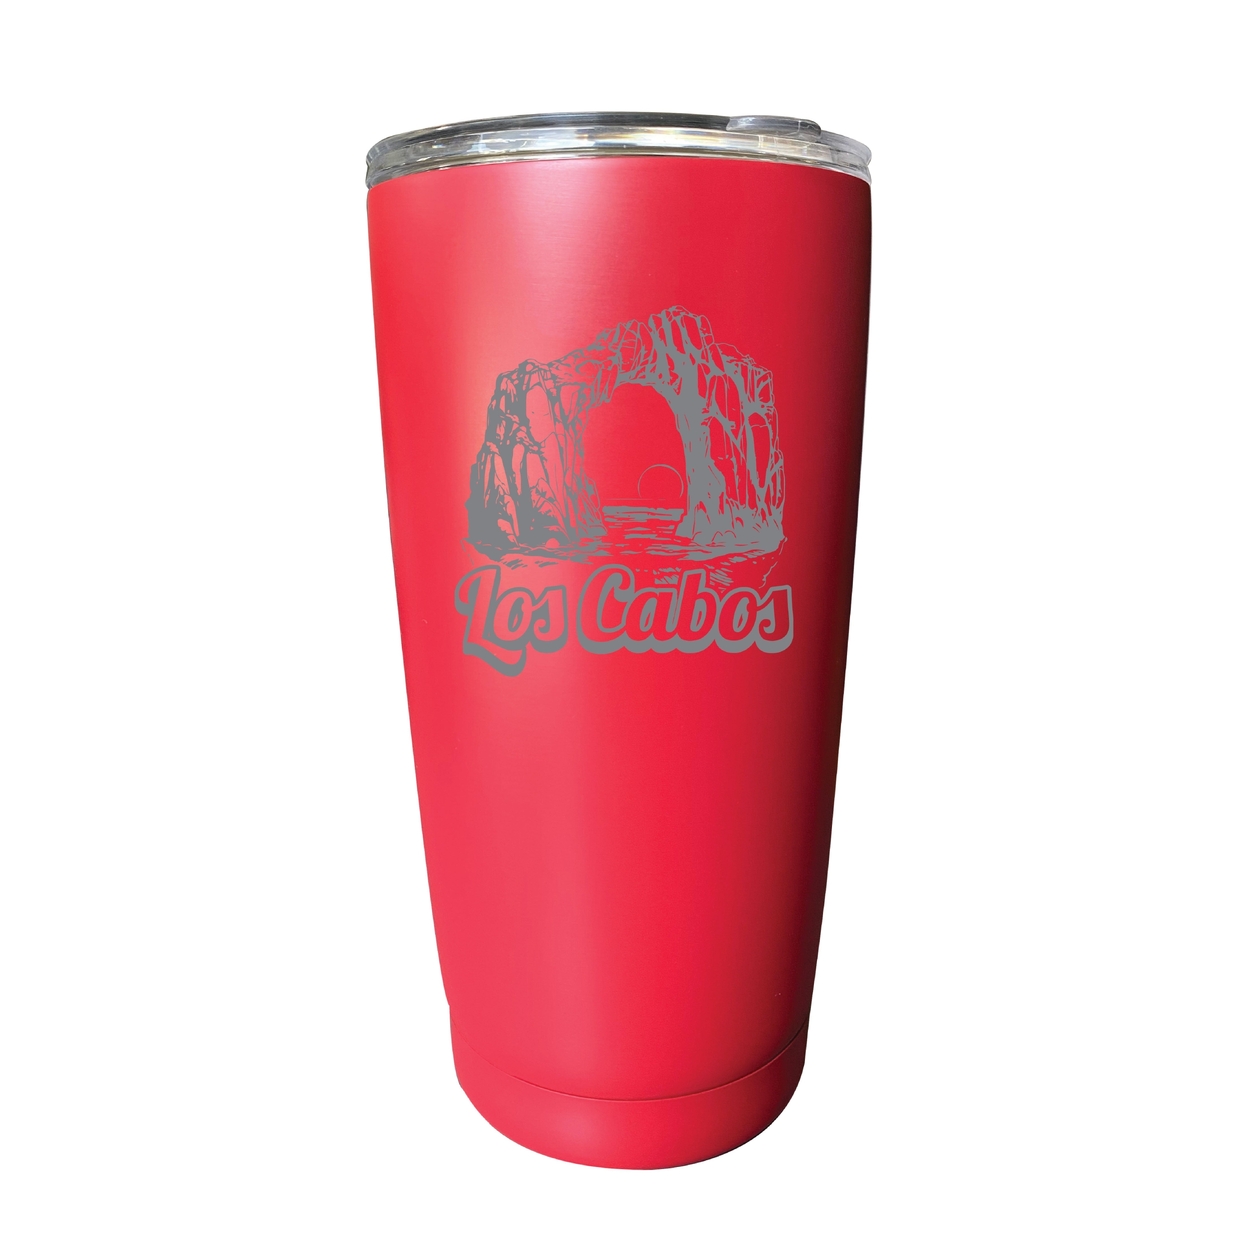 Los Cabos Mexico Souvenir 16 Oz Engraved Stainless Steel Insulated Tumbler - Red,,2-Pack